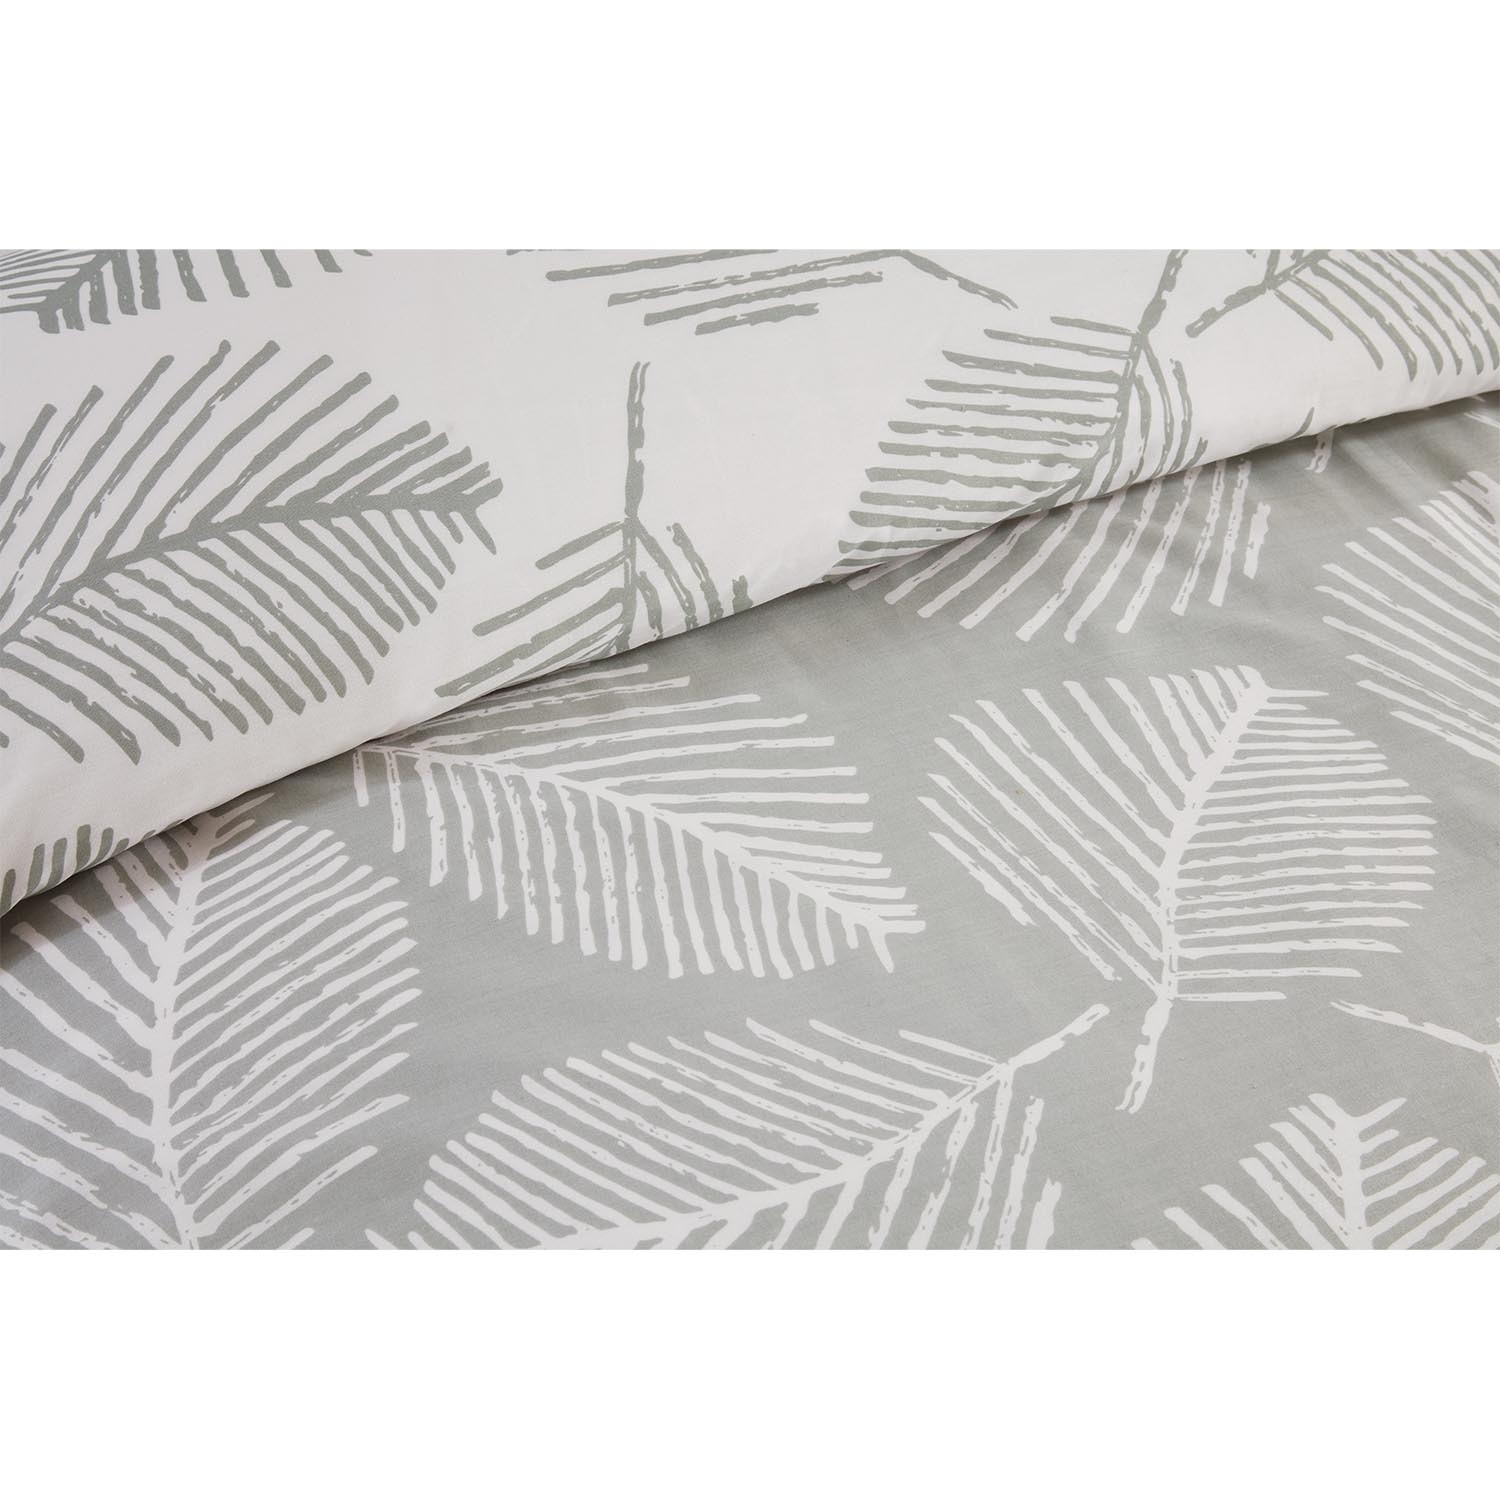 Falling Leaves Duvet Cover and Pillowcase Set - Green and White / Single Image 4